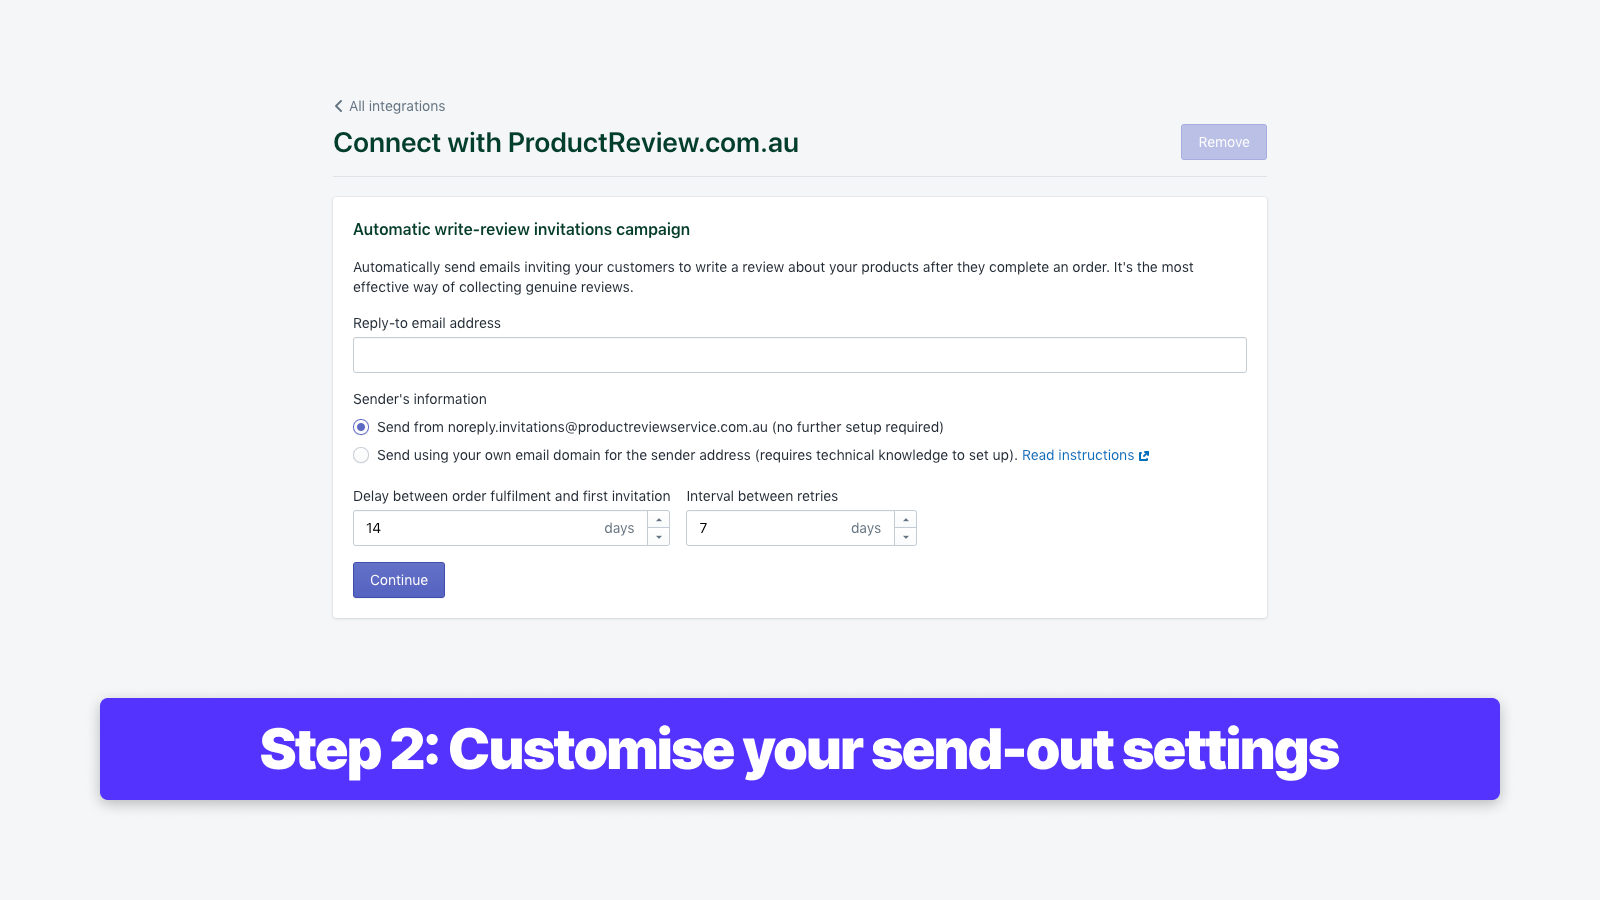 Customise your send-out settings